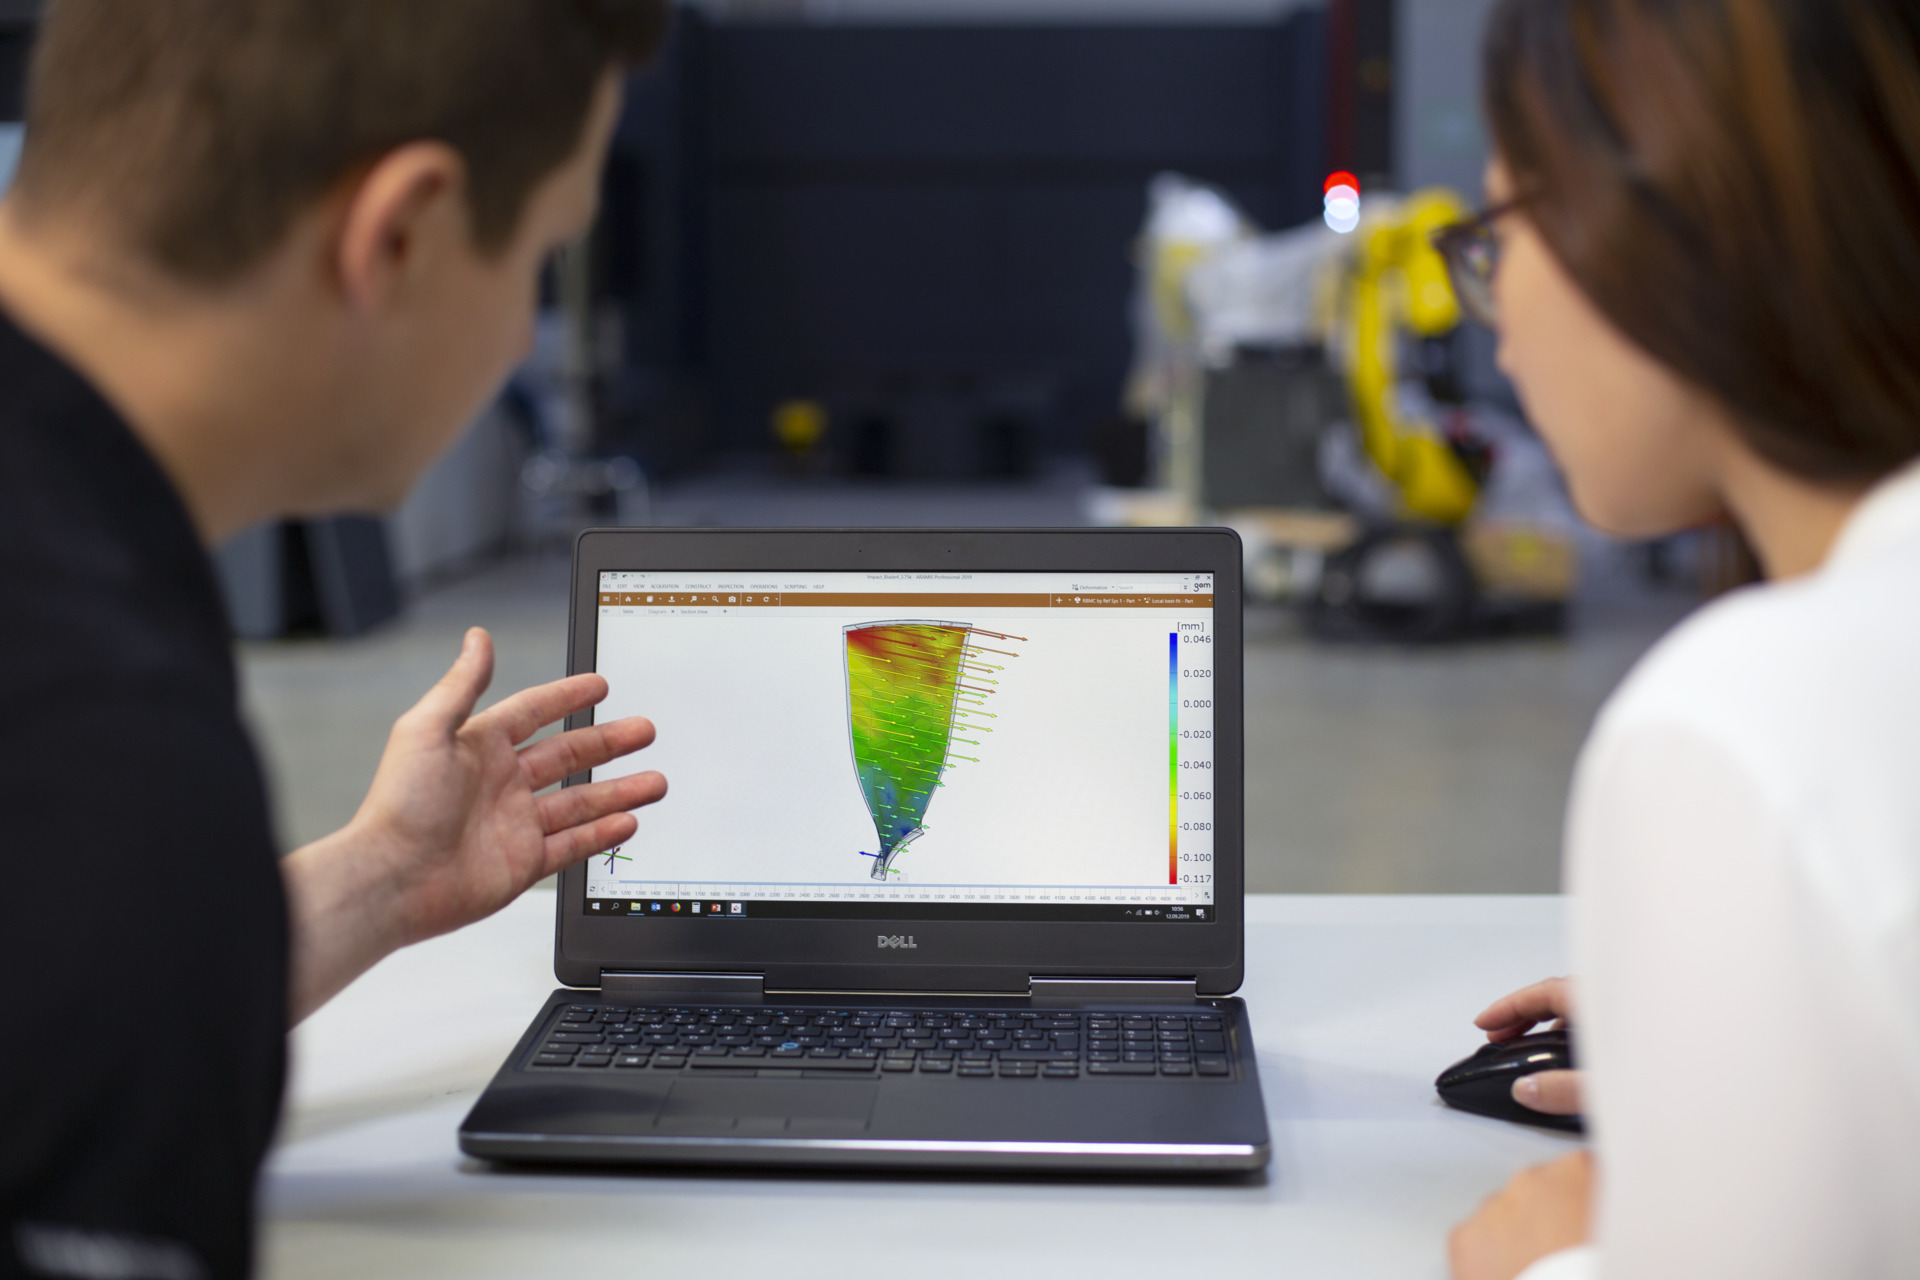 Two analysts look at the results of vibration analysis on a laptop.